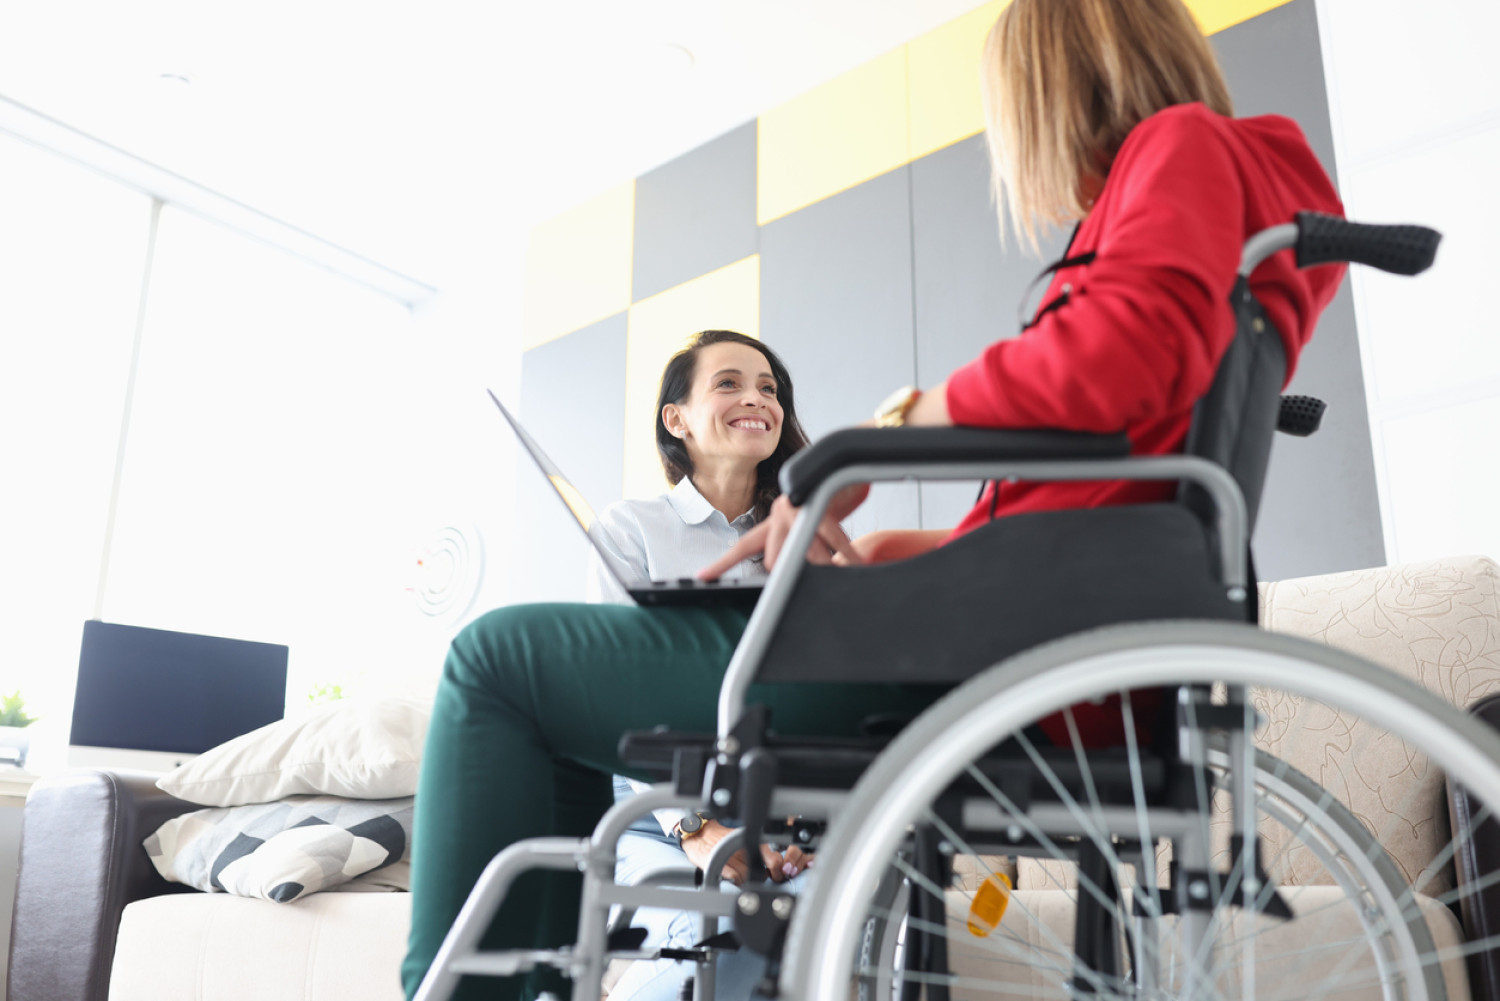 A one-on-one session with a student in a wheelchair, showcasing the provision of tailored educational support for students with physical disabilities.